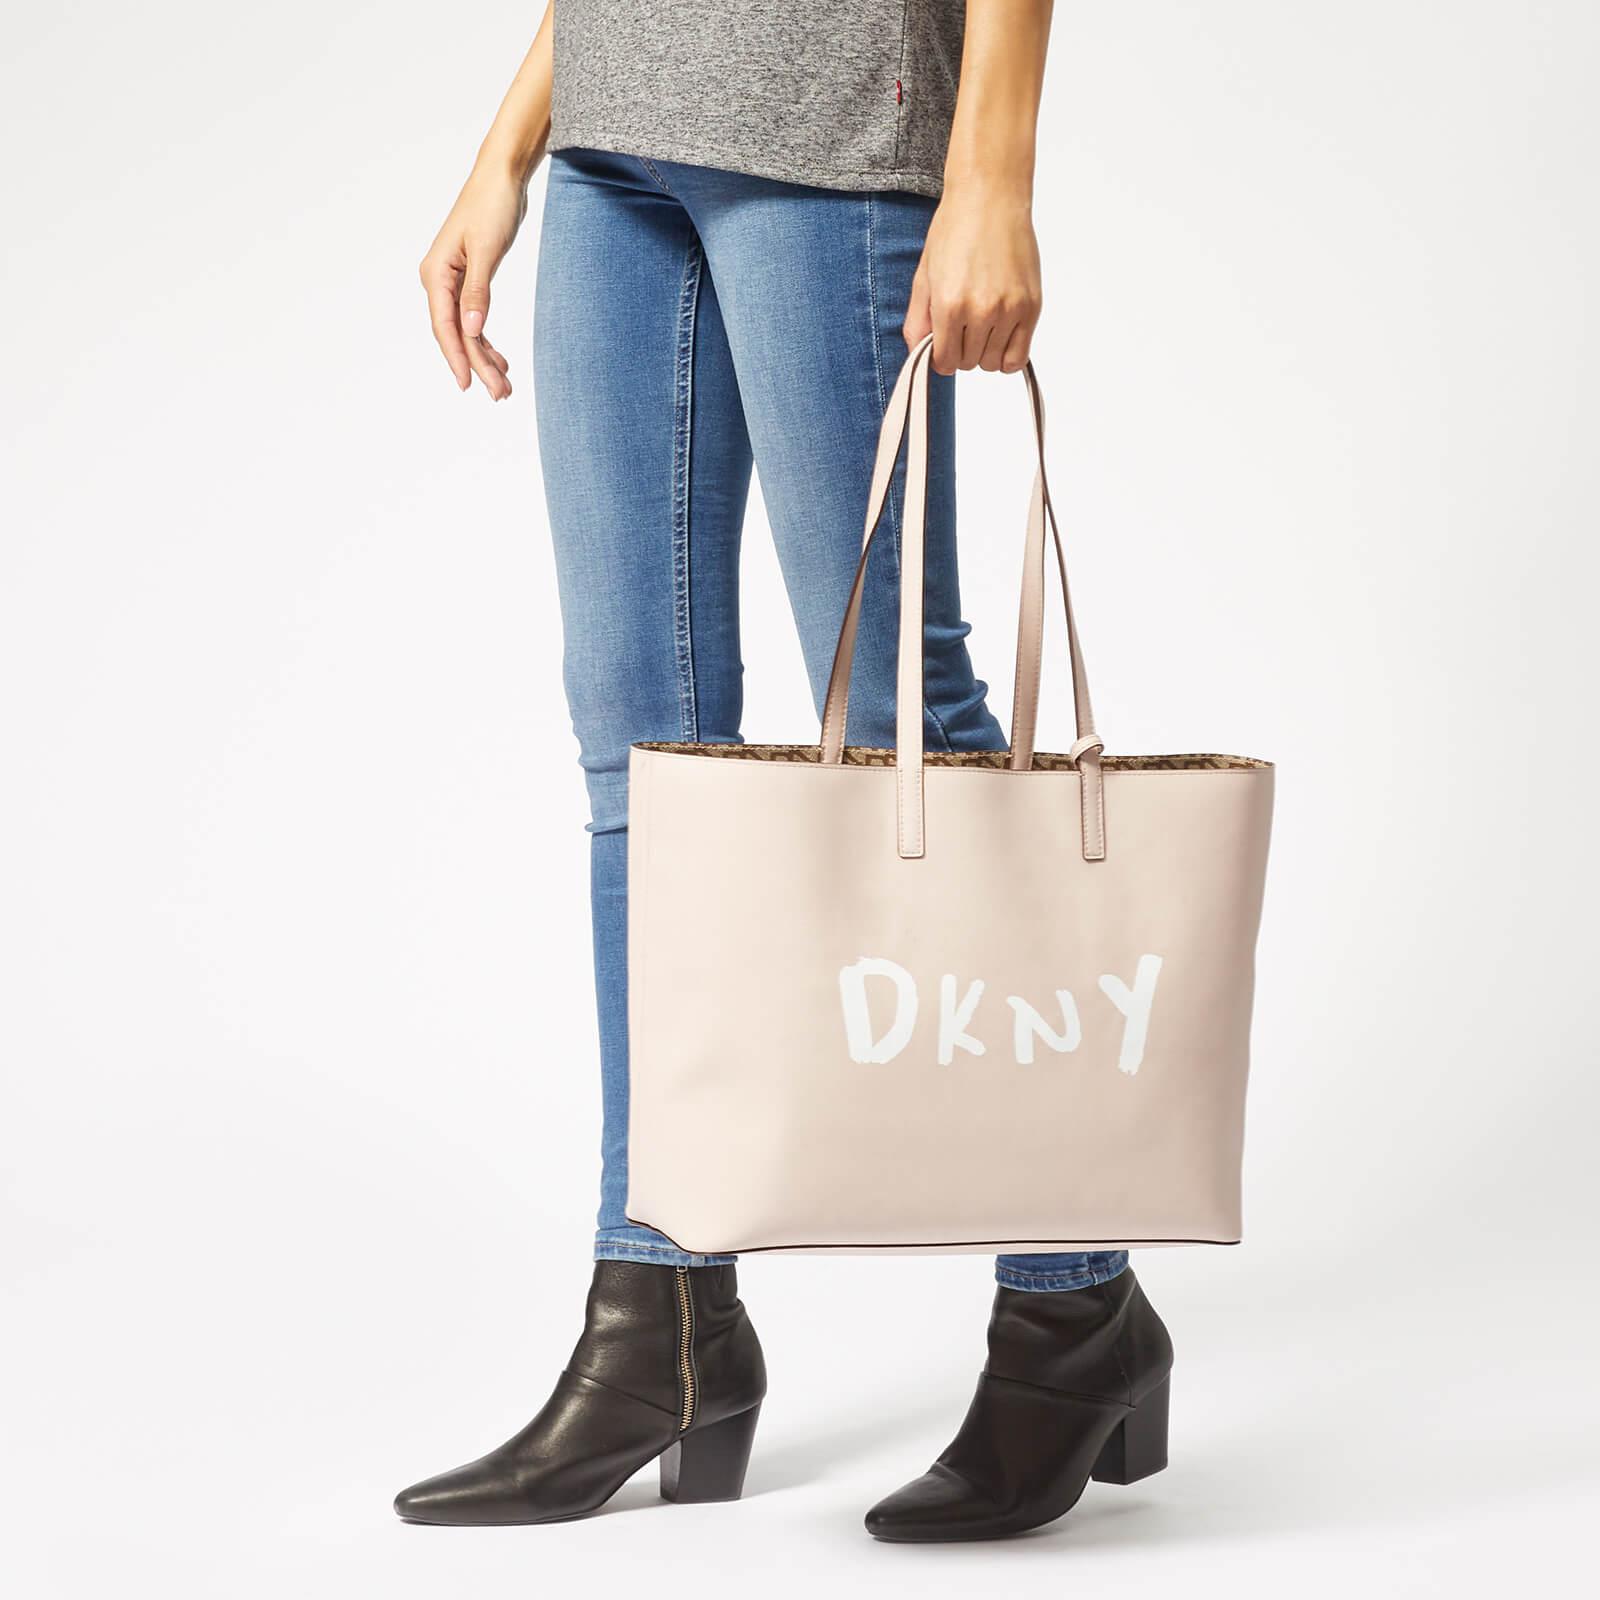 dkny reversible tote,Quality assurance,protein-burger.com